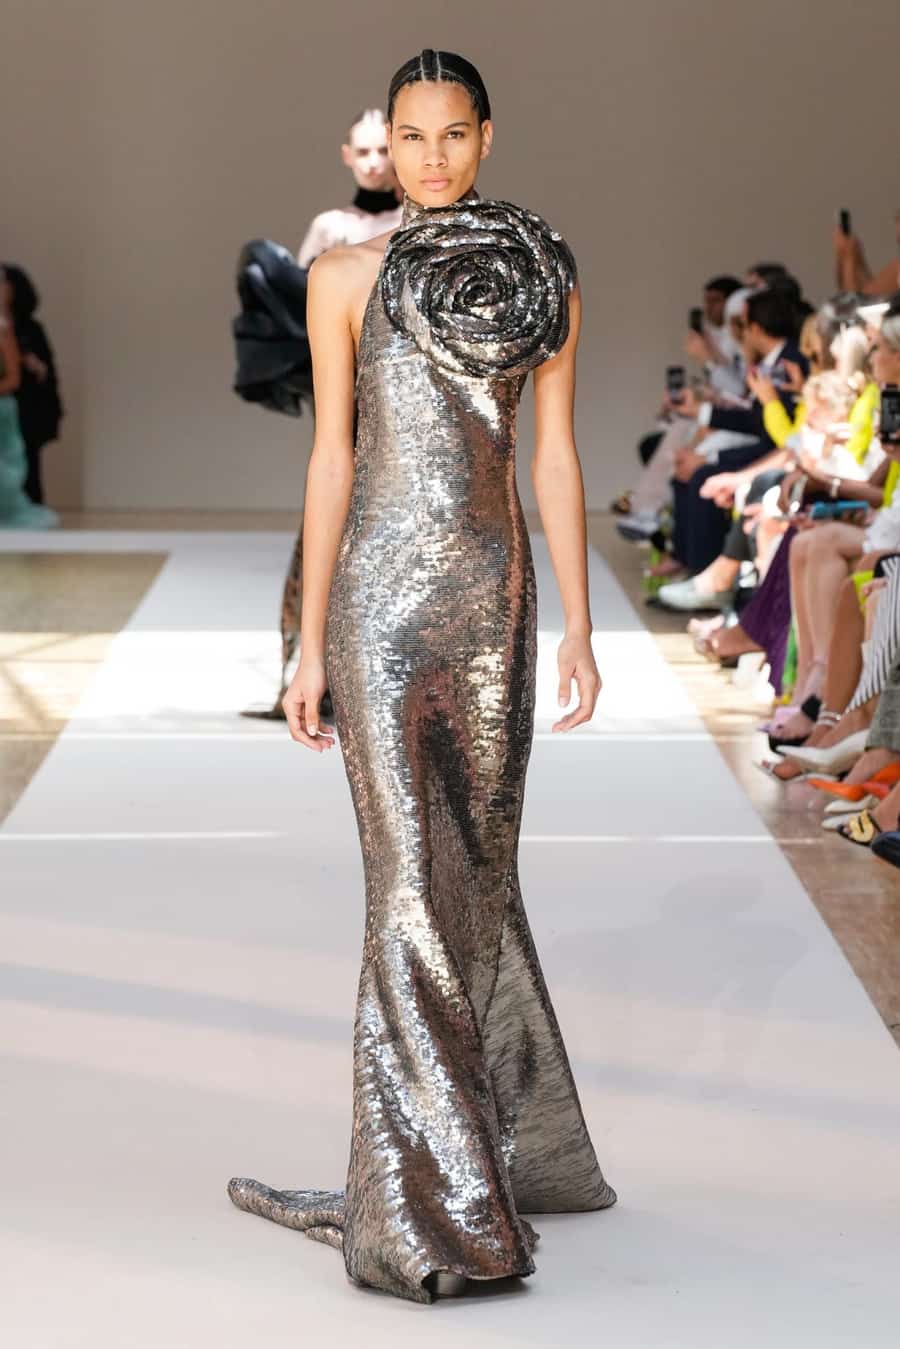 This Ellie Saab-designed dress from Paris Fashion Week 2022 combined the event's prominent metallic and floral trends.